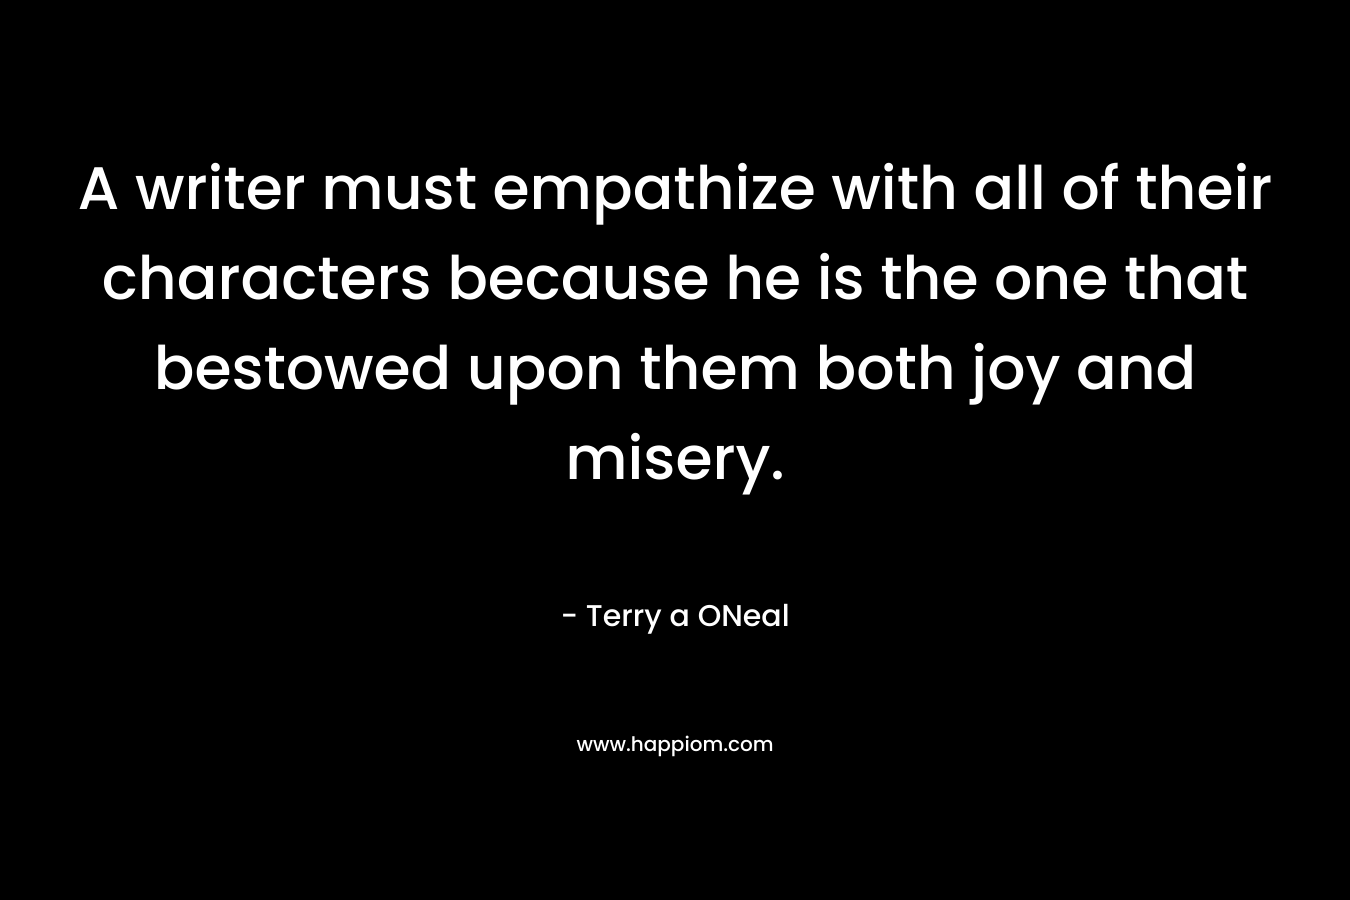 A writer must empathize with all of their characters because he is the one that bestowed upon them both joy and misery. – Terry a ONeal